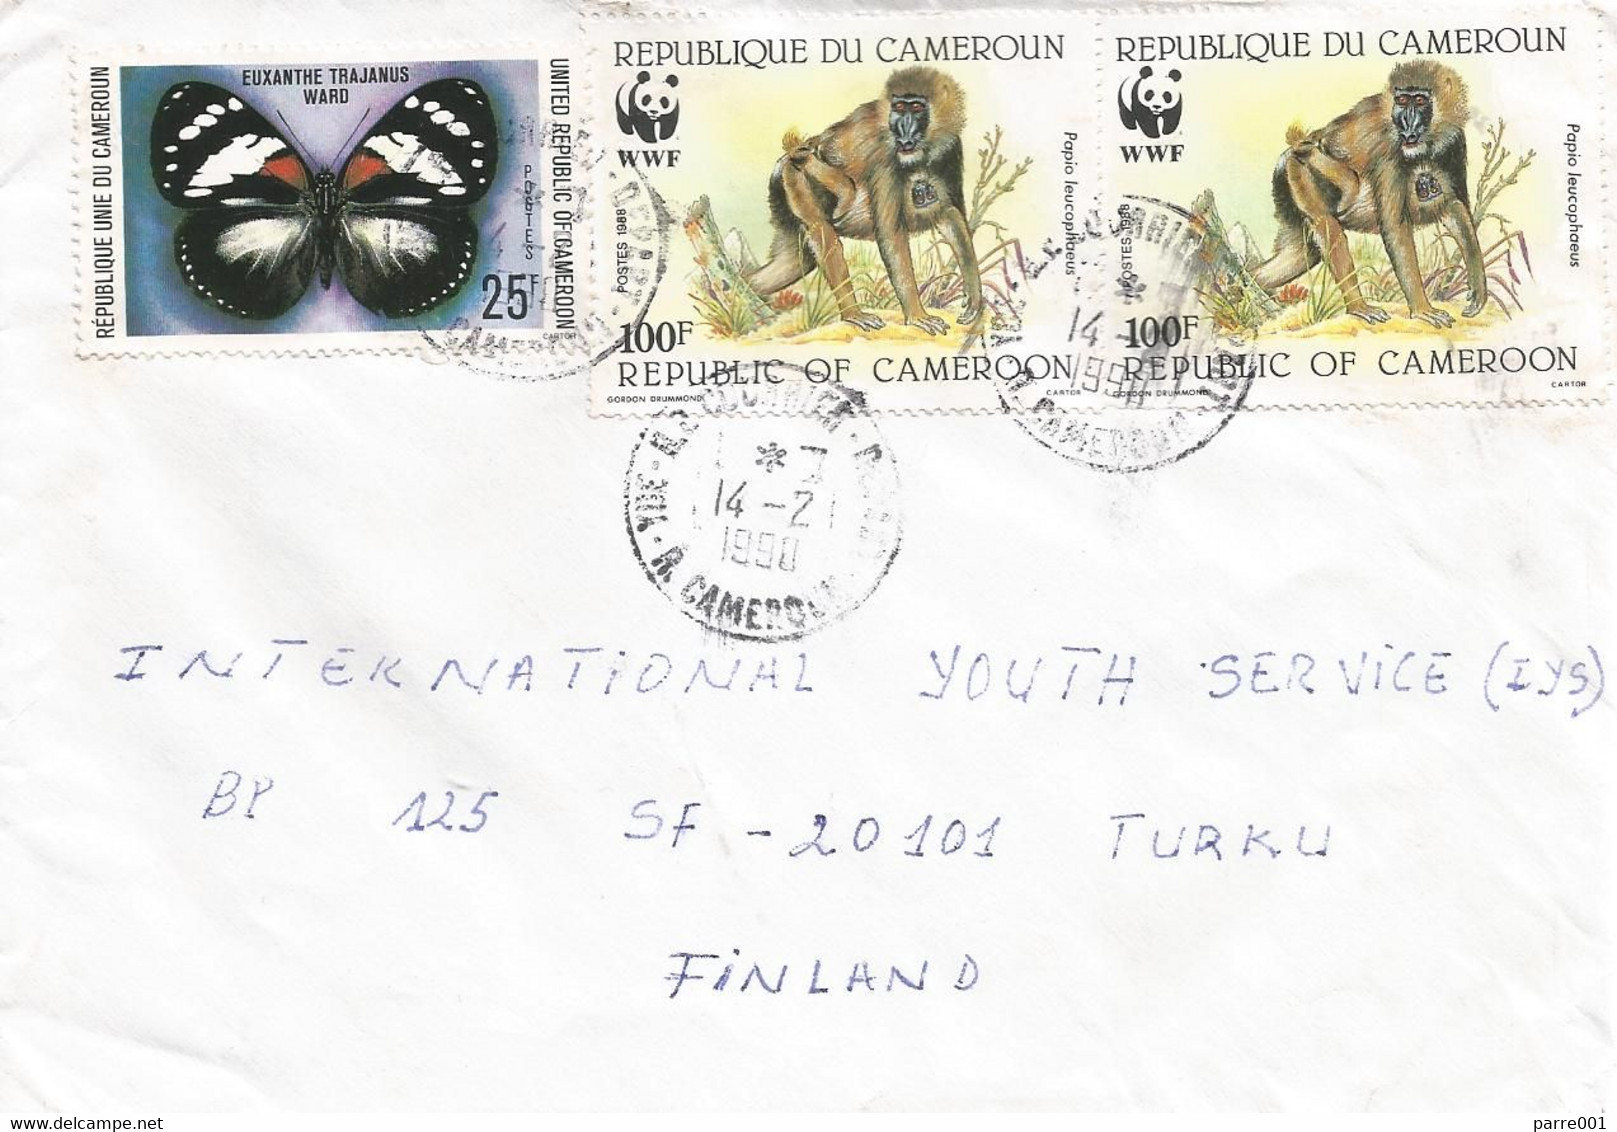 Cameroon Cameroun 1990 Yaounde WWF Drill Ape Monkey Trajan's Forest Queen Euxanthe Trajanus Butterfly Cover - Lettres & Documents